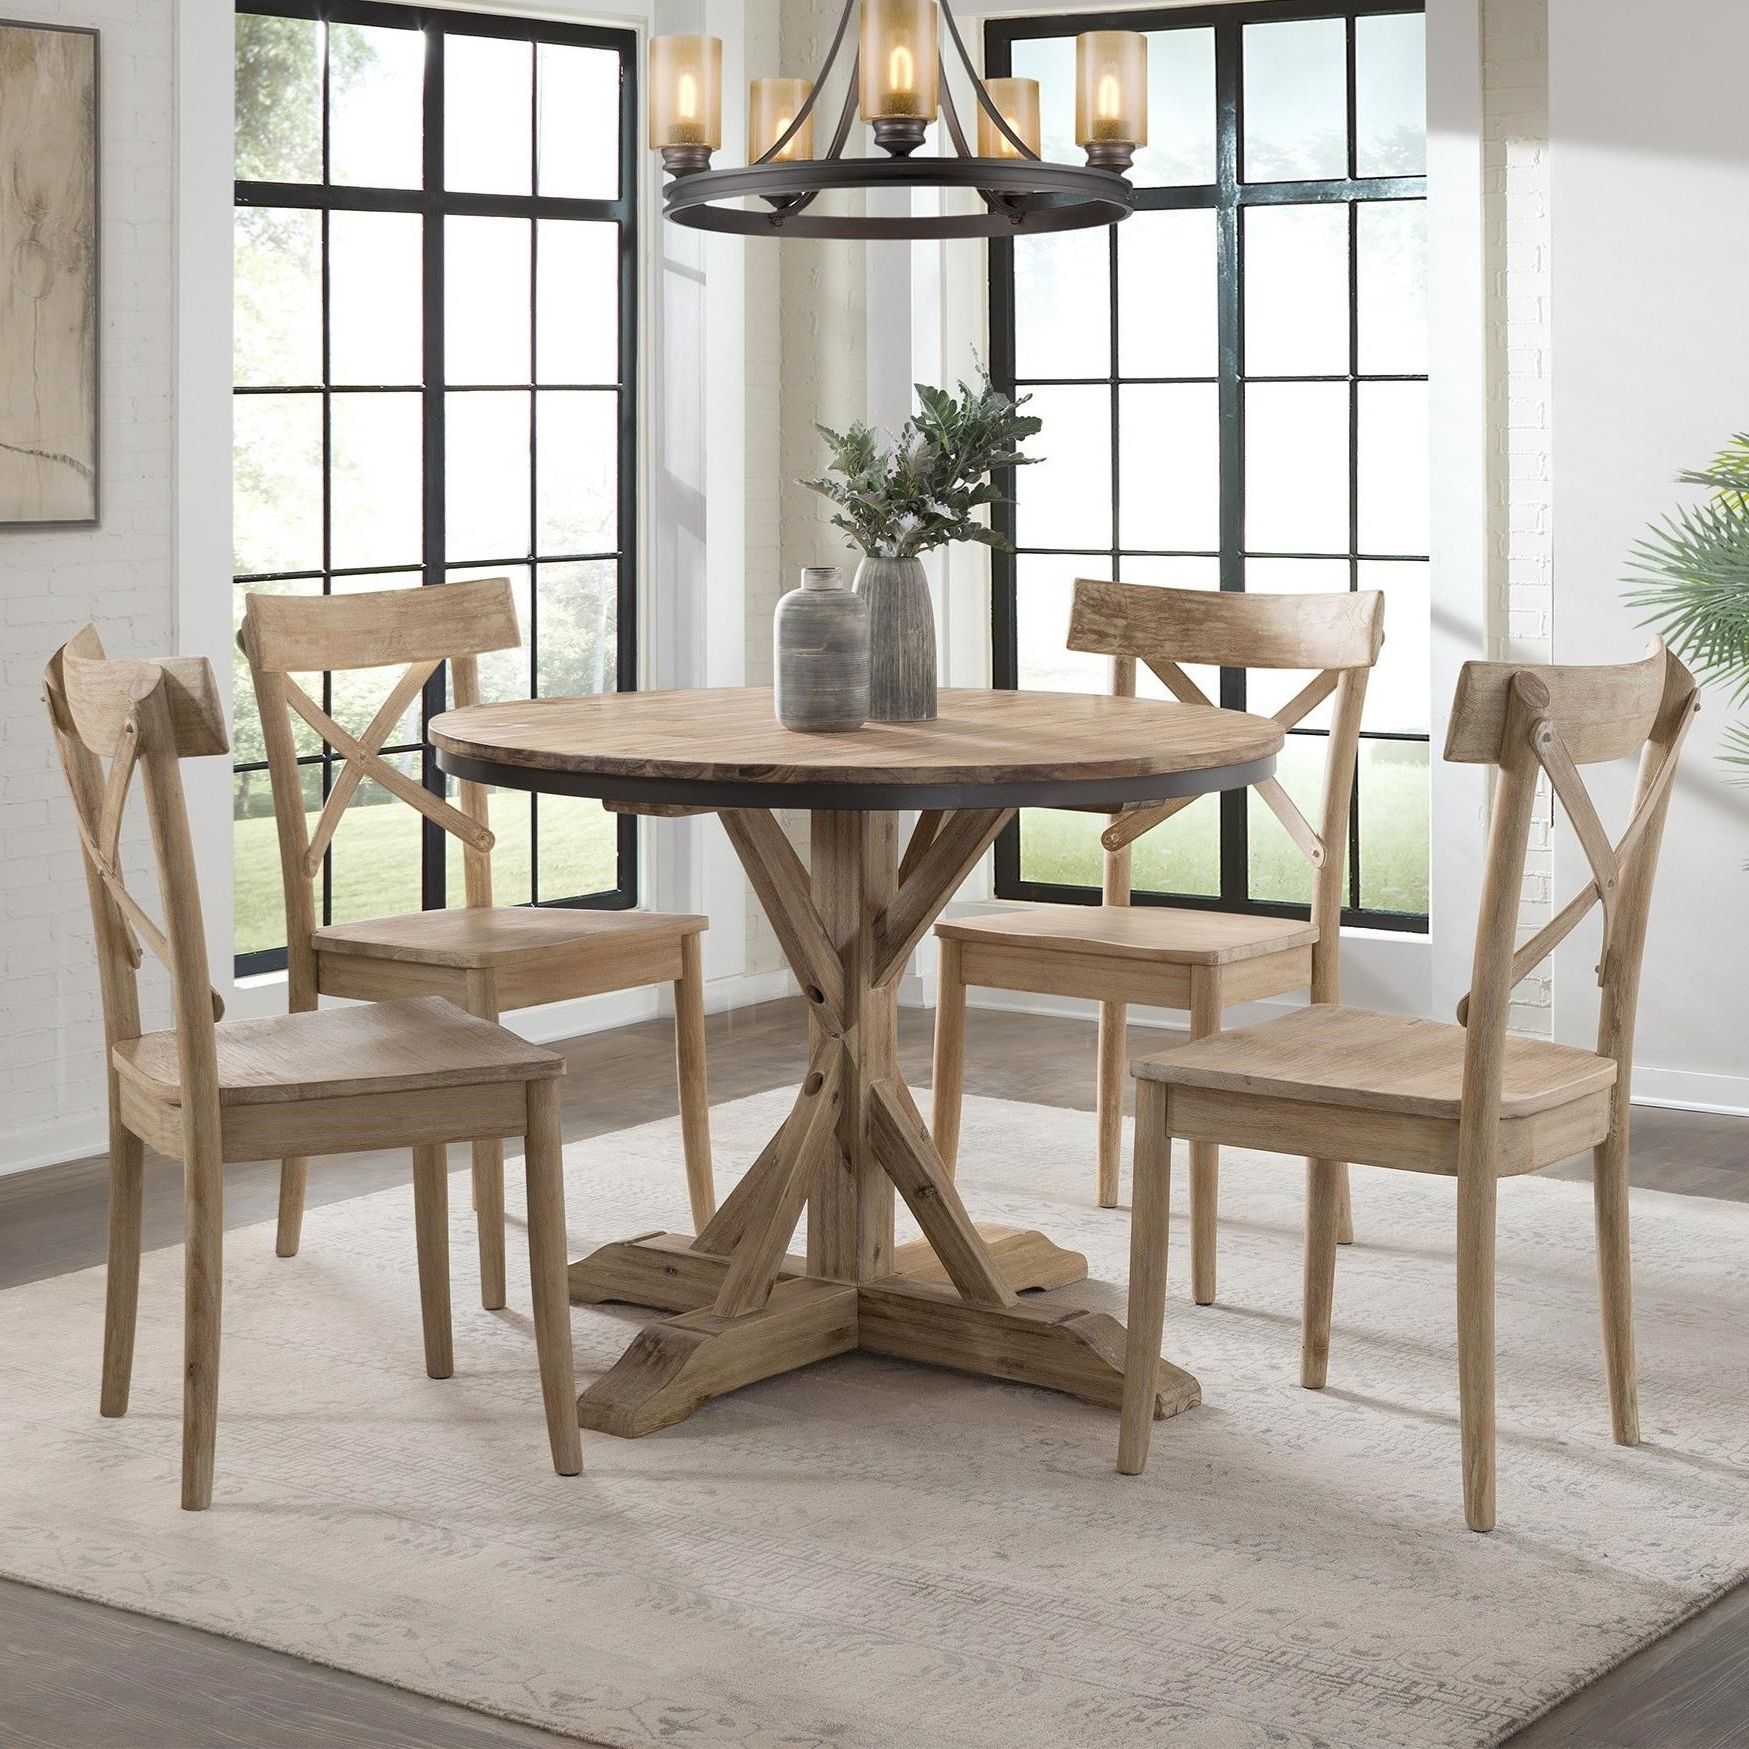 Famous Elements International Callista Contemporary Round Standard Height 5 In 5 Piece Cafe Dining Sets (View 4 of 15)